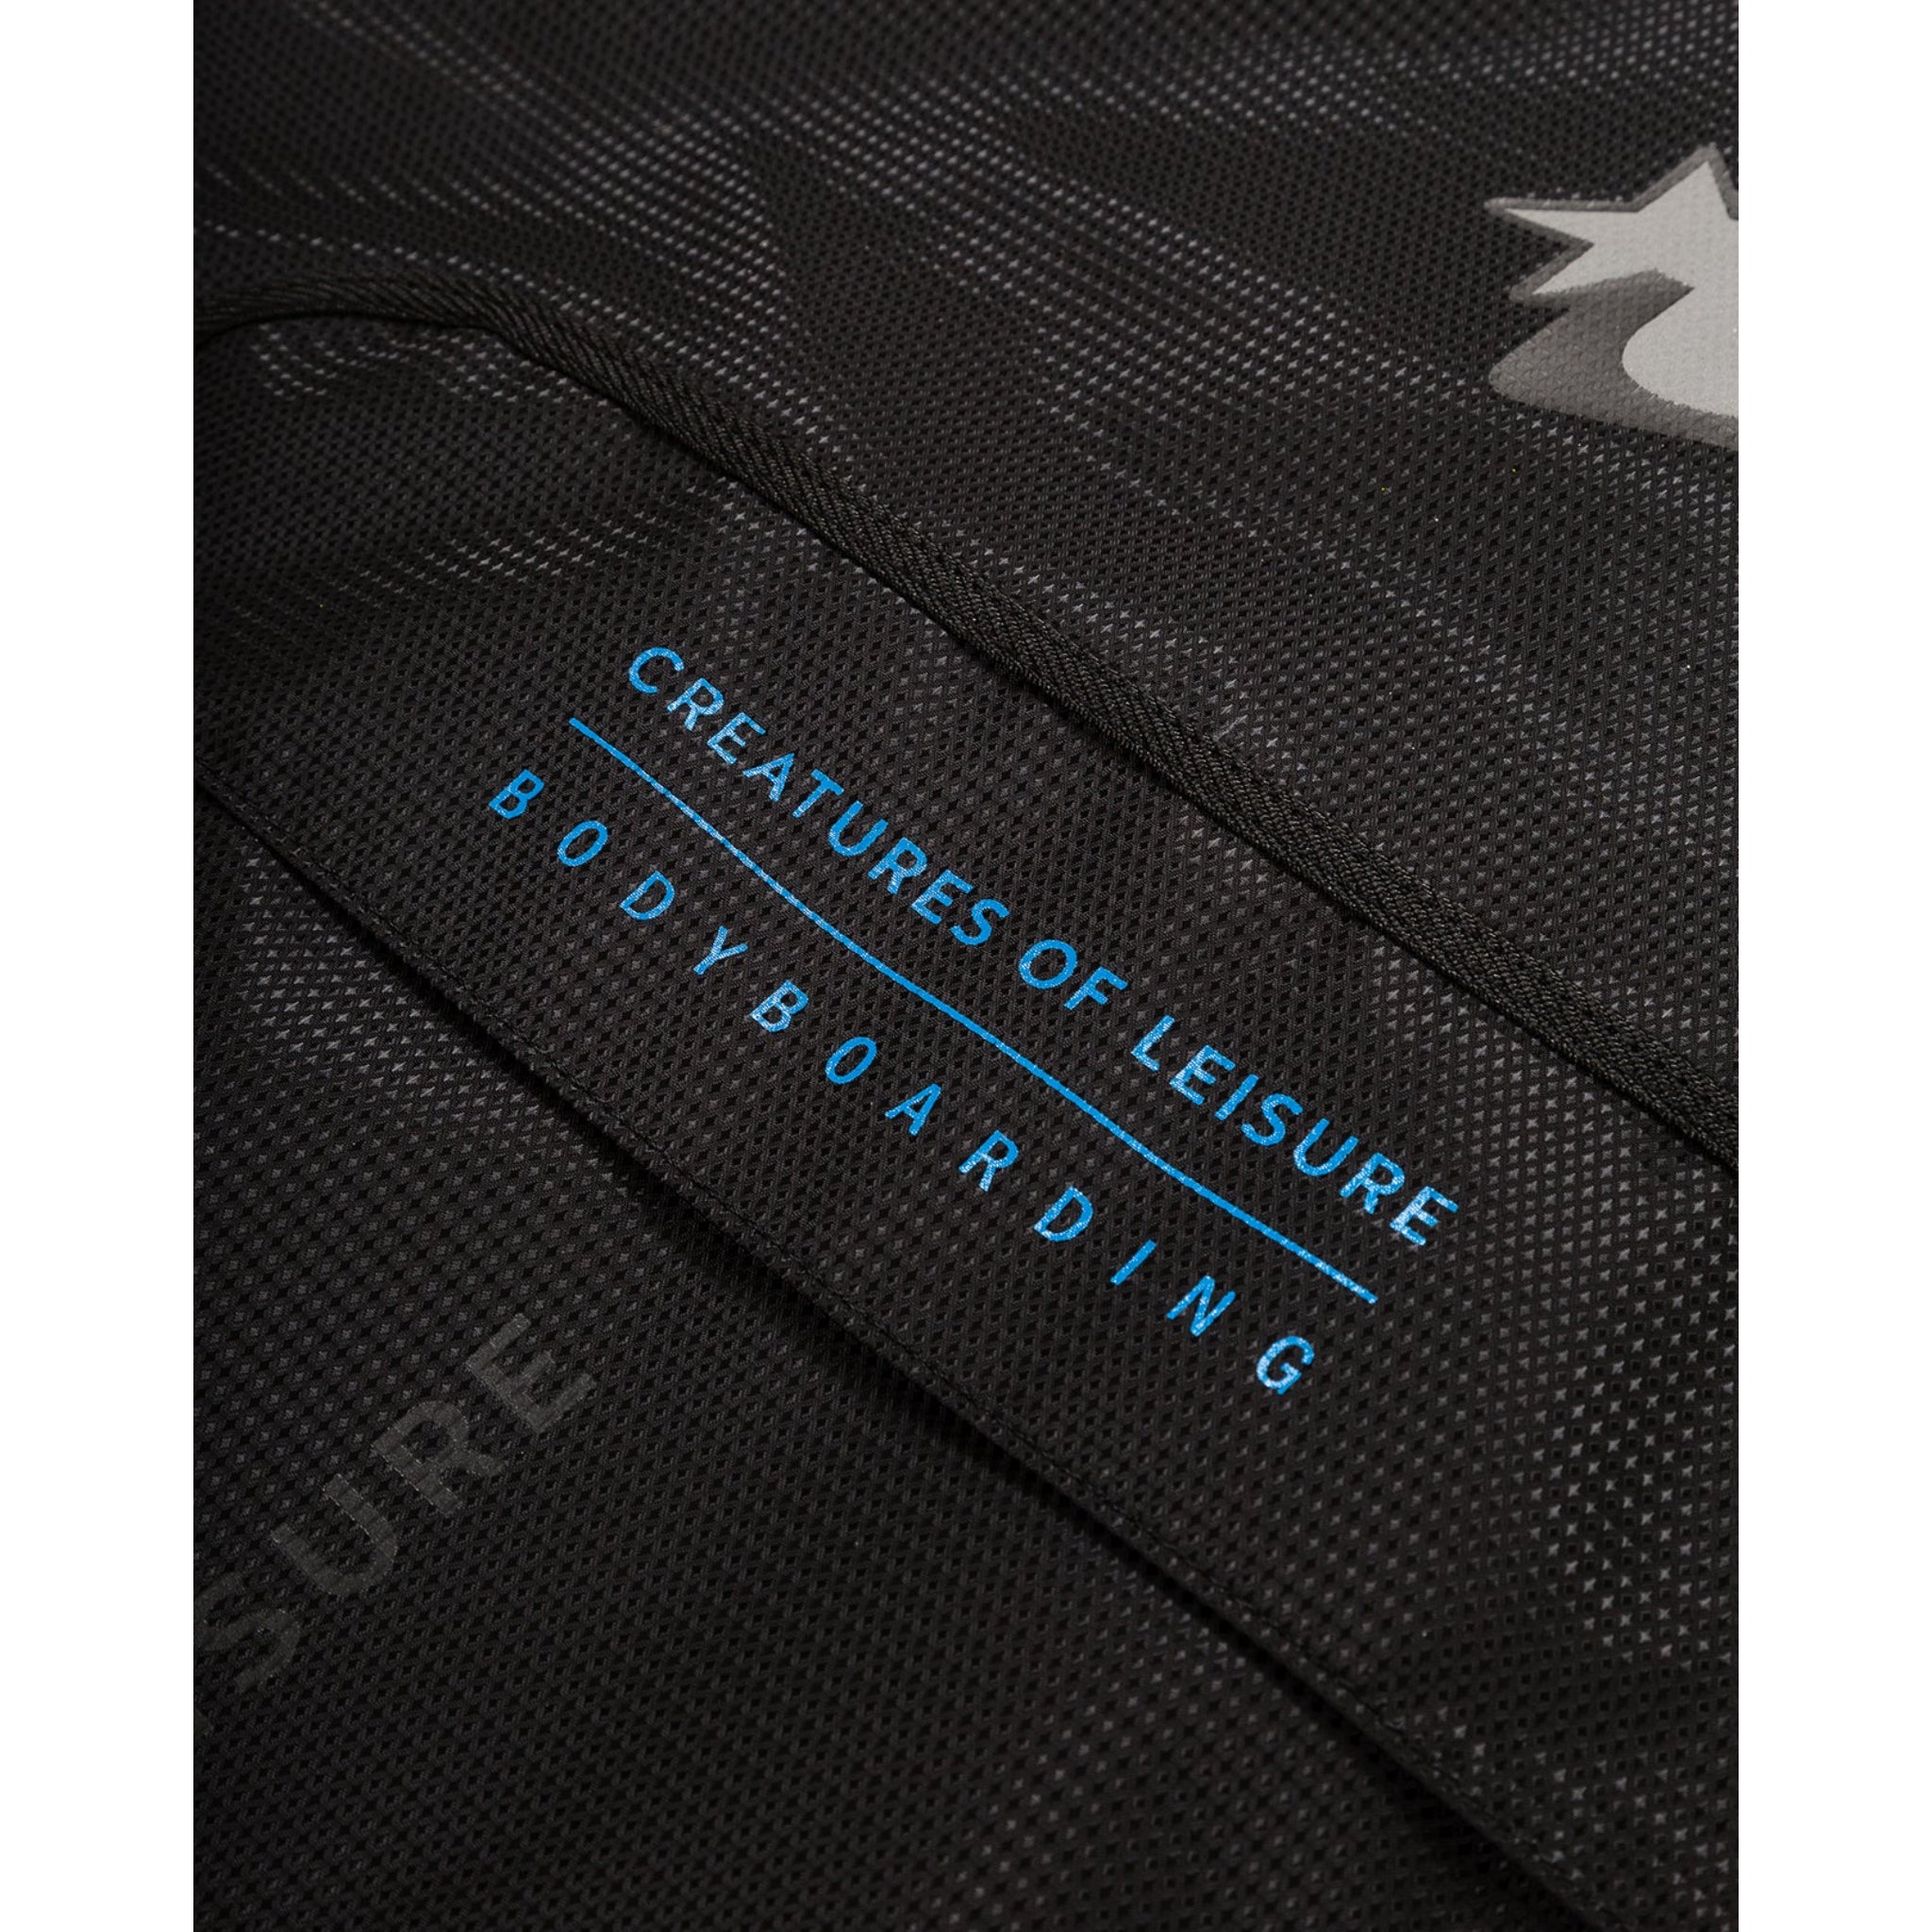 Creatures Bodyboard Day Use Cover Bag